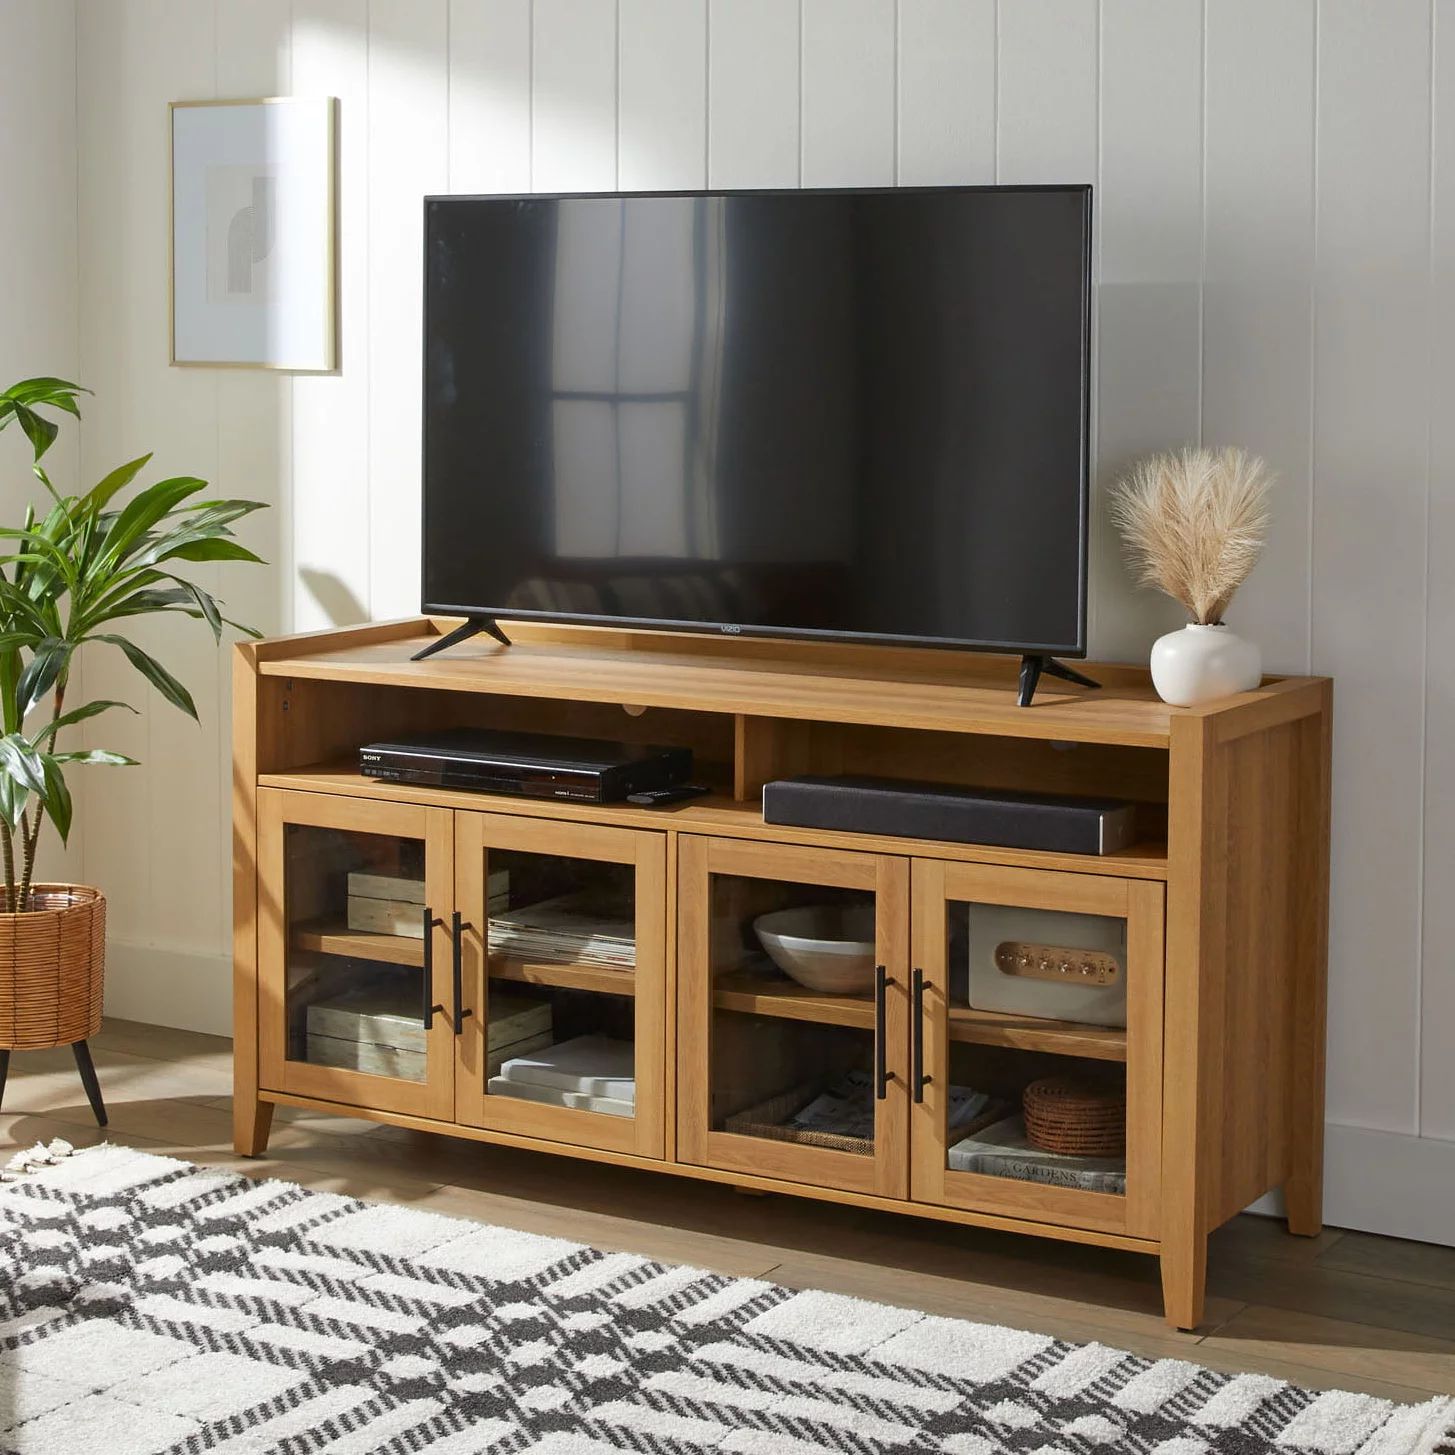 Better Homes & Gardens Reading Refined Farmhouse TV Stand for TVs up to 65", Light Honey Finish | Walmart (US)